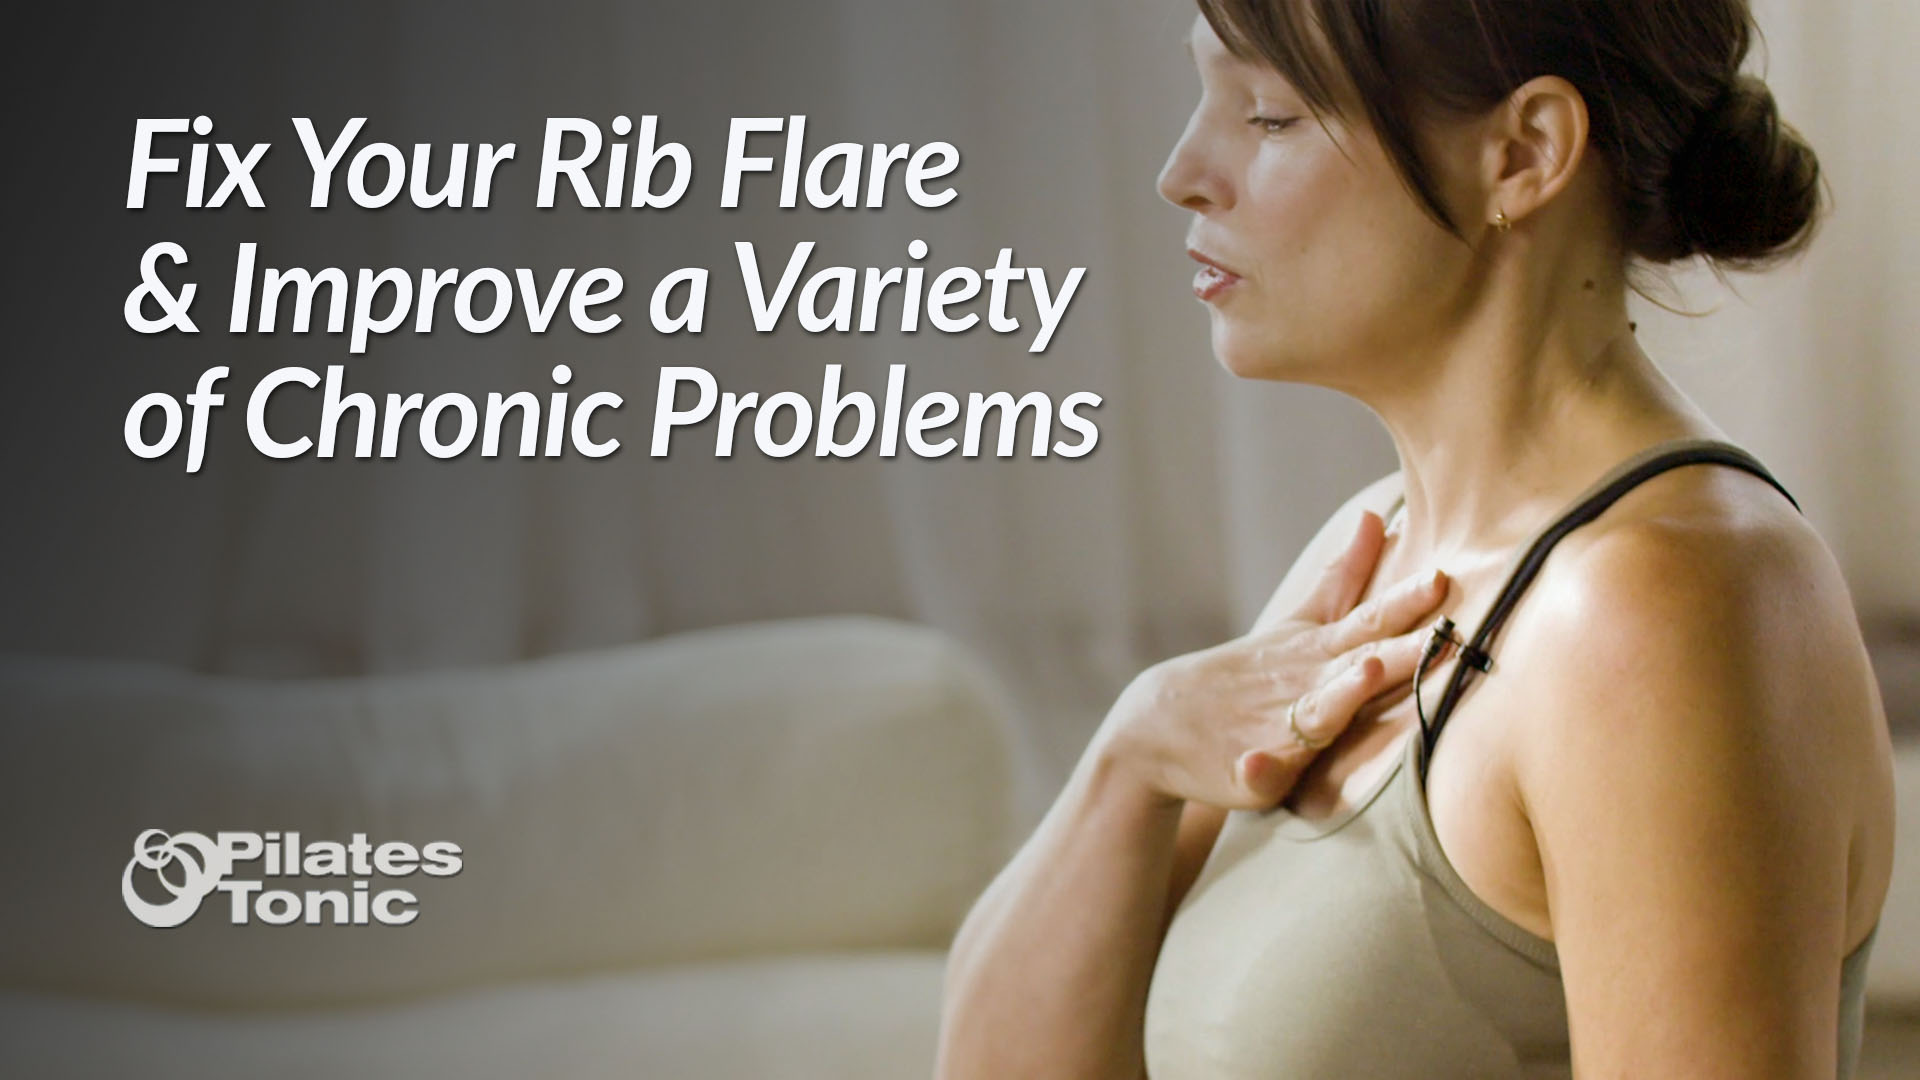 Fix Your Rib Flare and Improve a Variety of Chronic Problems